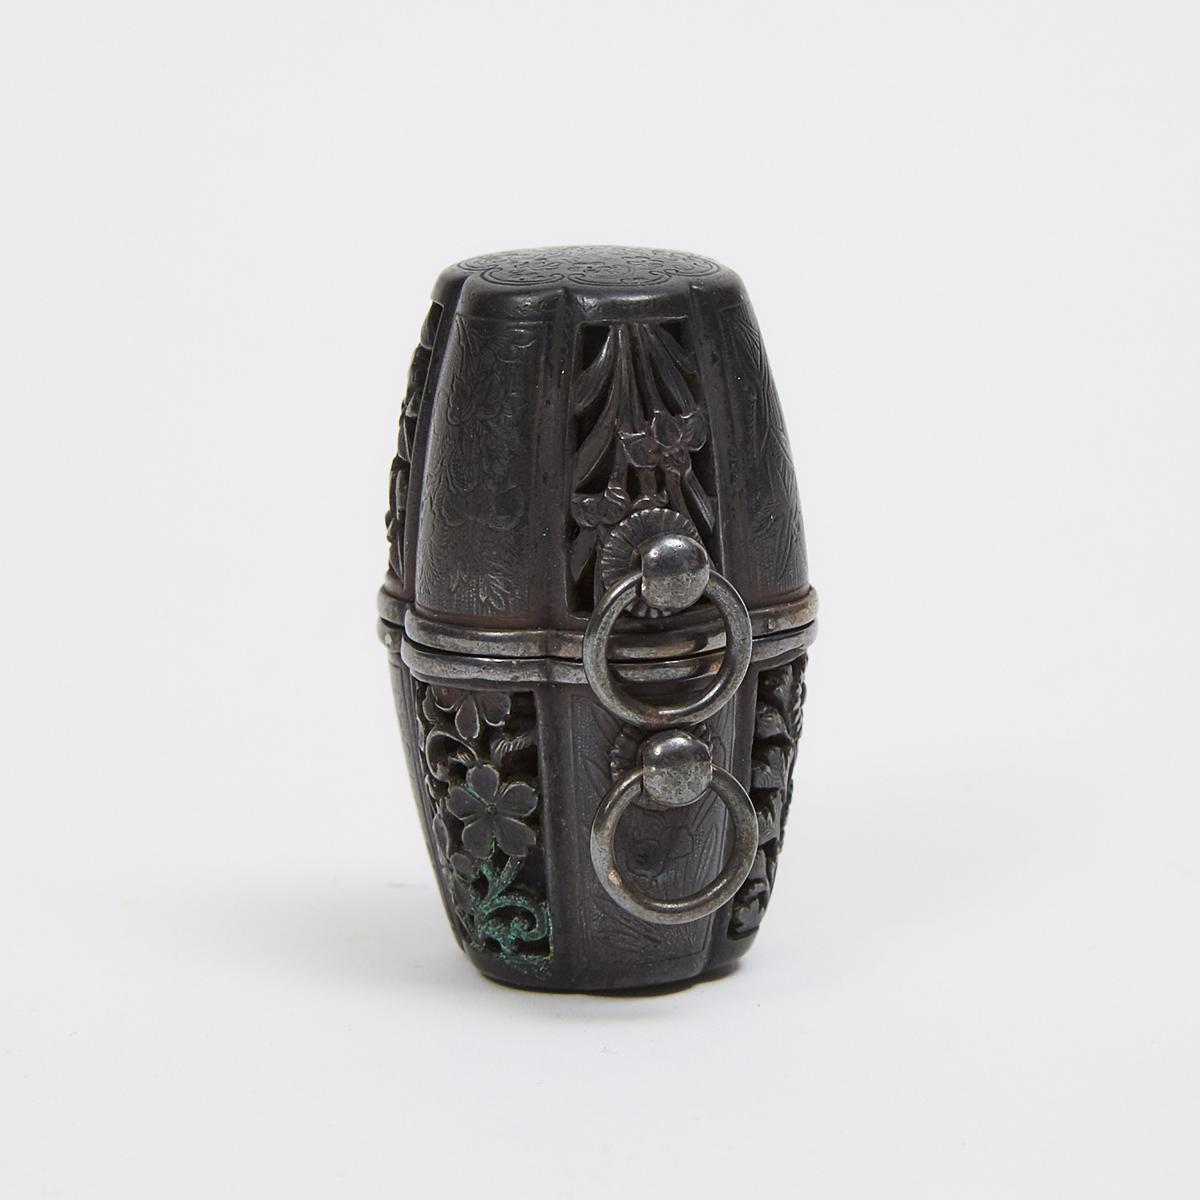 A Shakudo Metal Netsuke of a Barrel with Silver Fitting and Interior Compass, Meiji Period, height 1